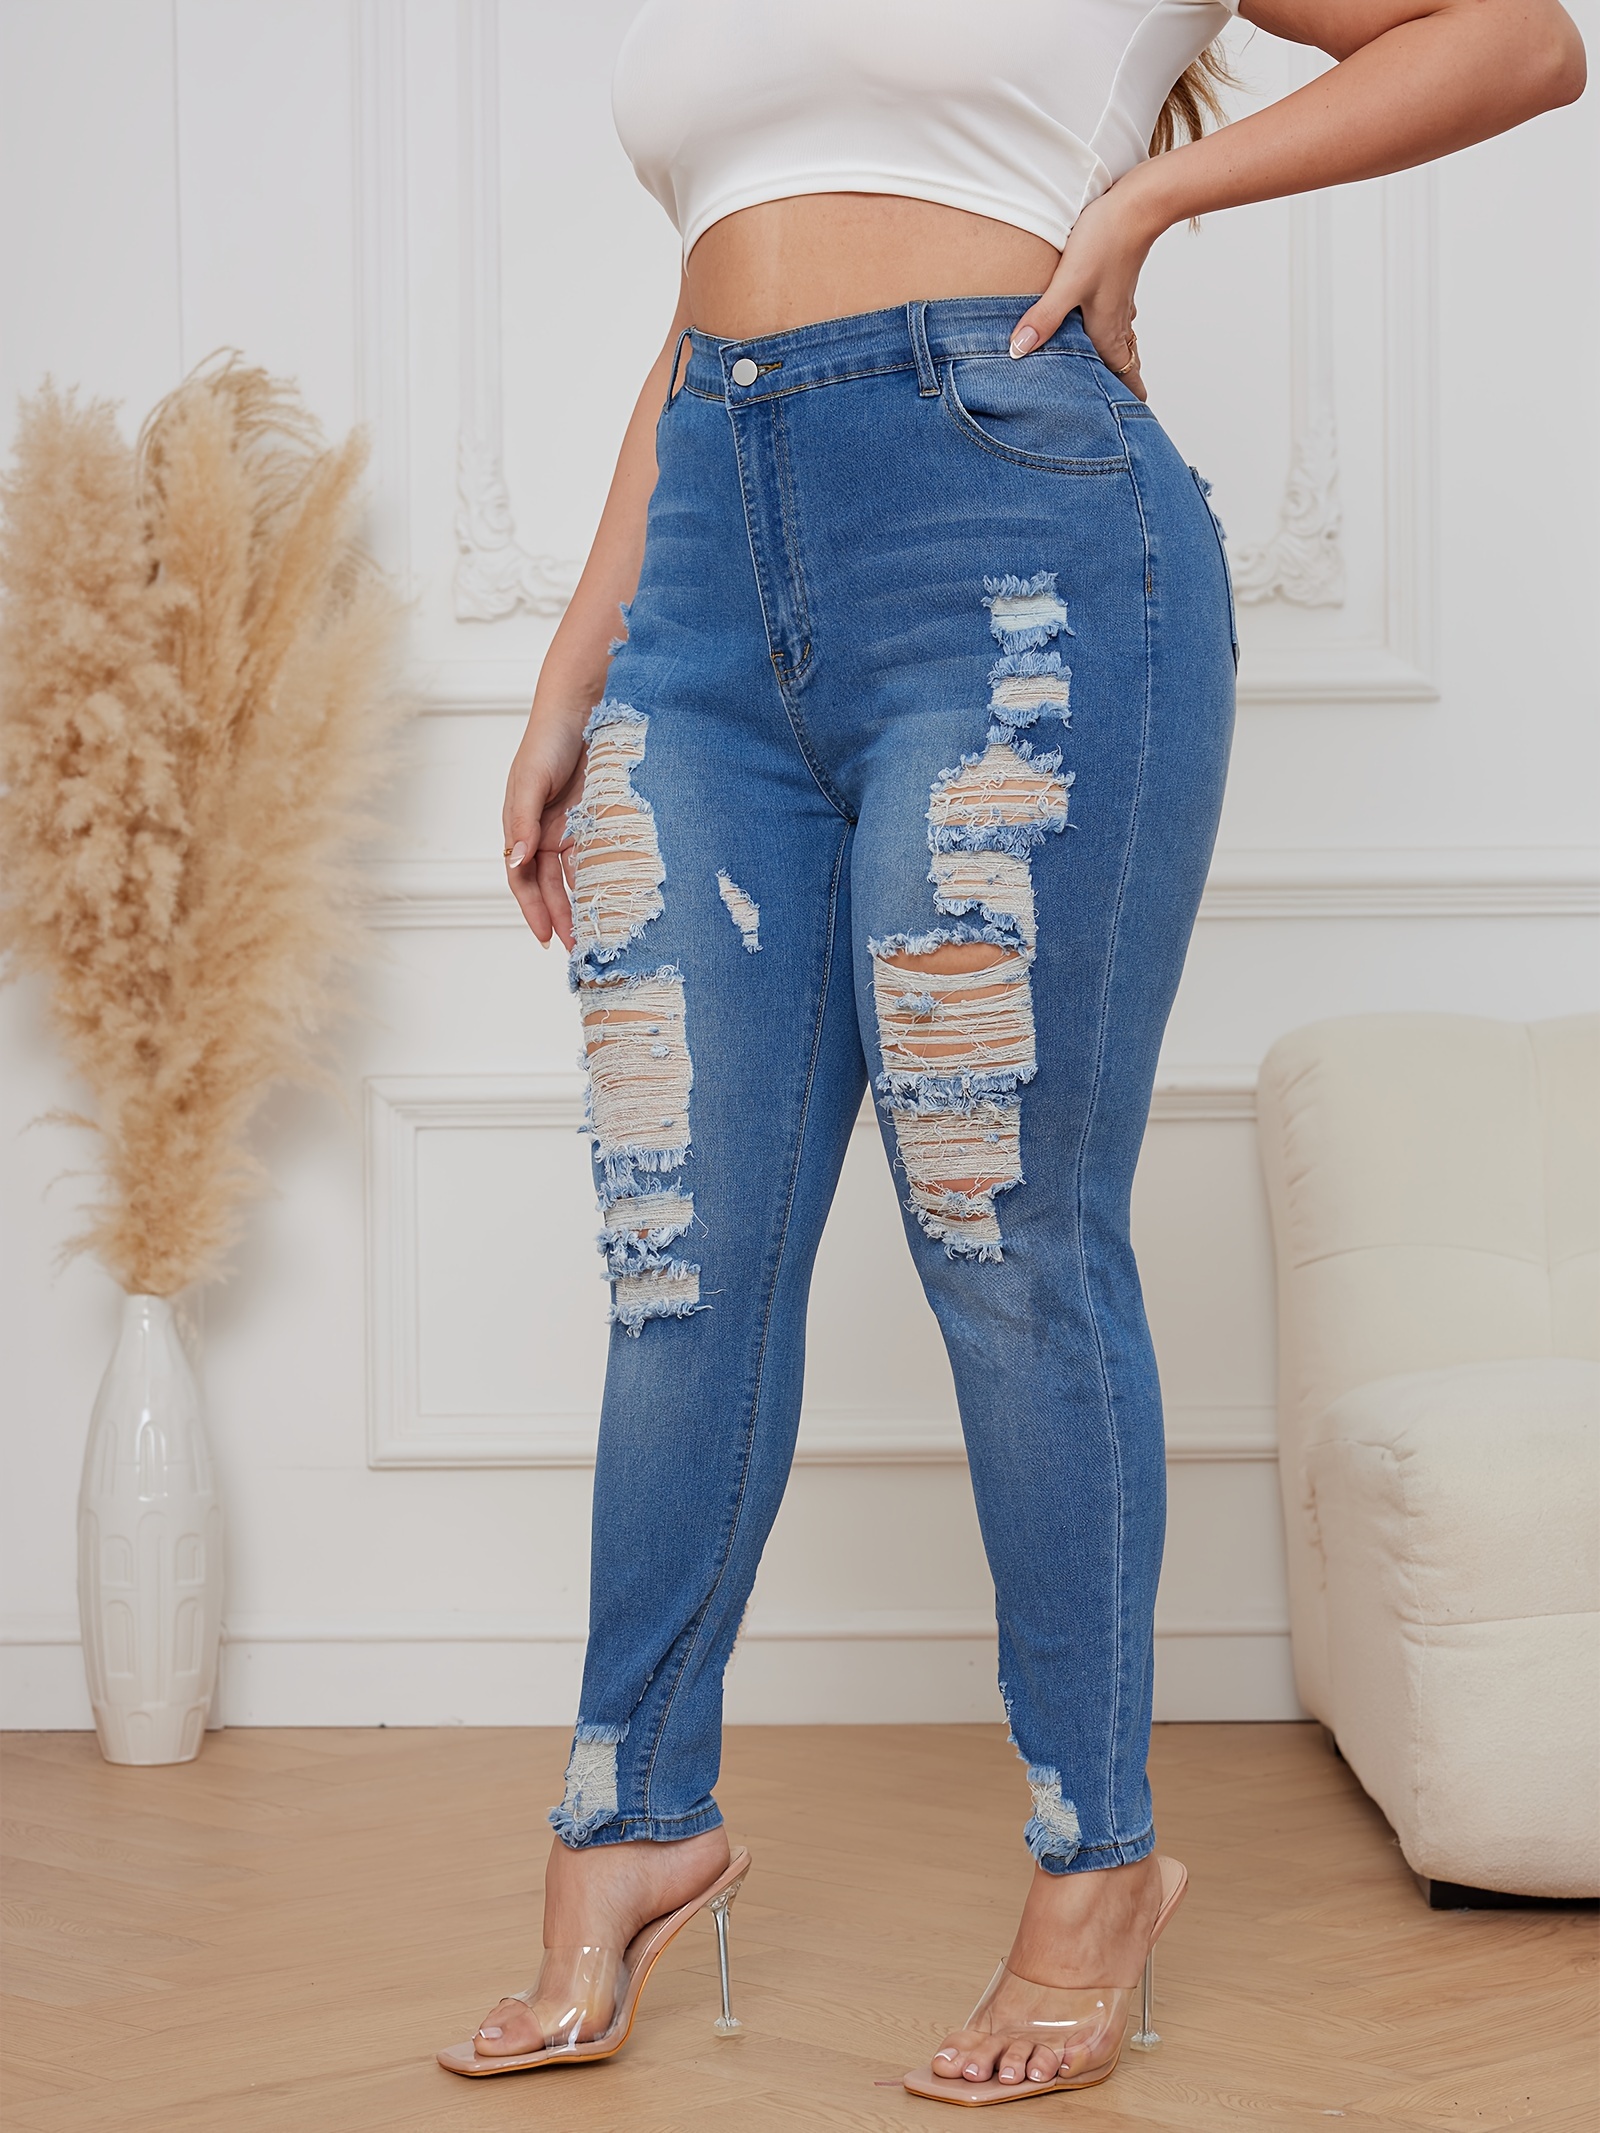 Plus Size Casual Jeans, Women's Plus Ripped Button Fly Medium Stretch  Skinny Destroyed Denim Pants